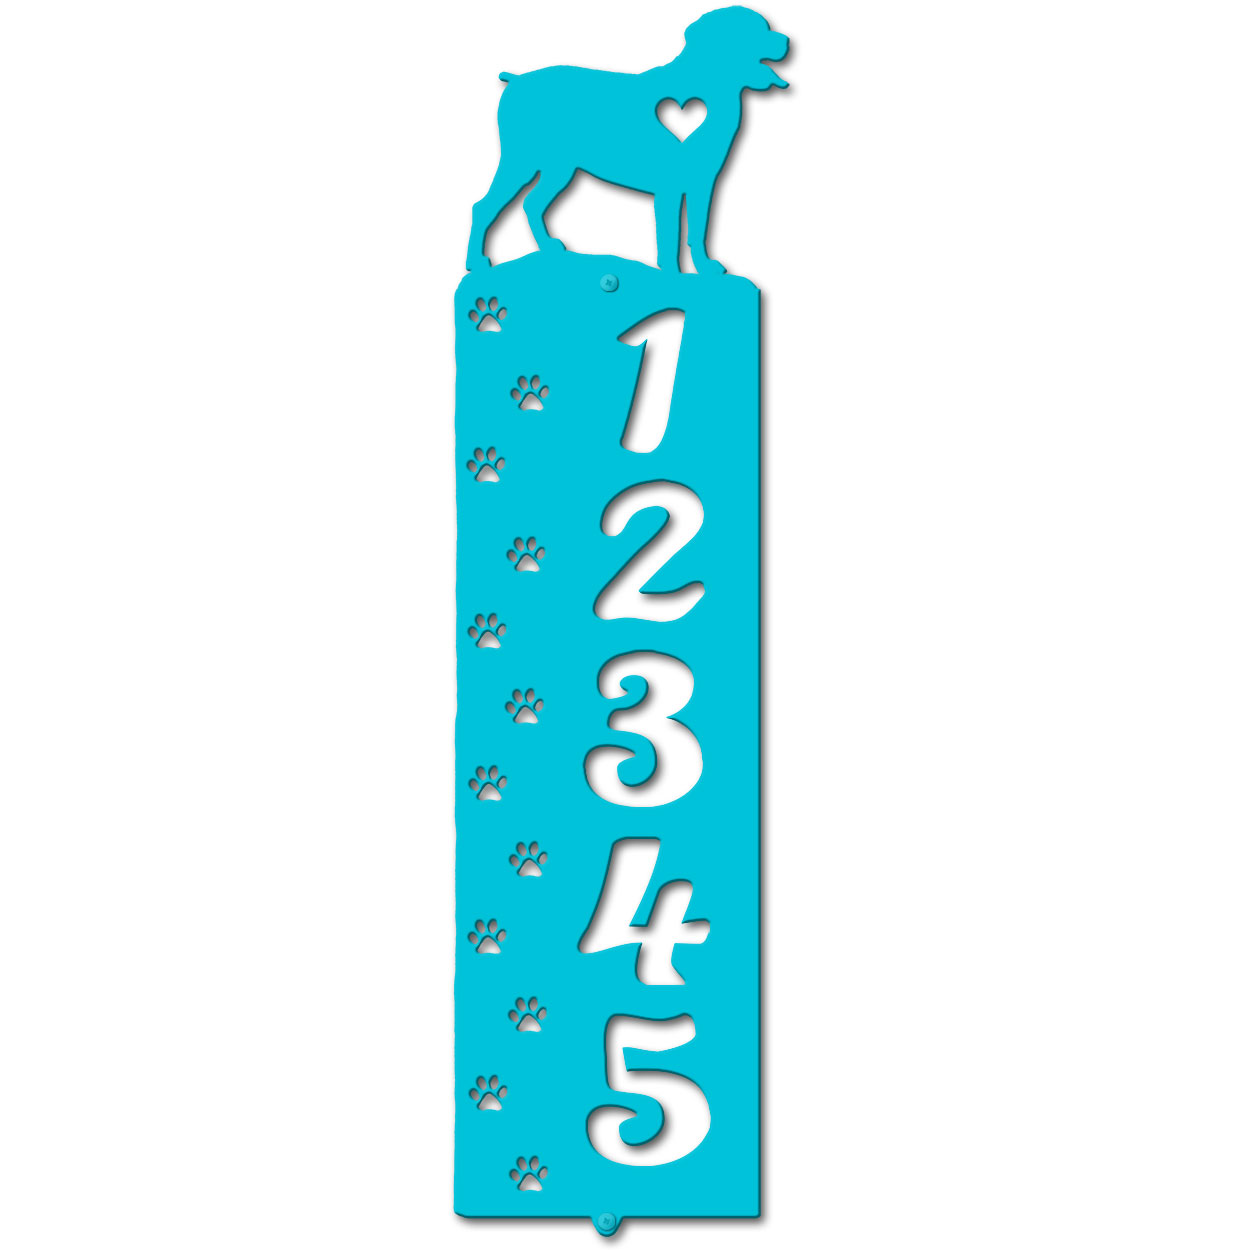 636315 - Rottweiler Cut-Outs Five Digit Address Number Plaque - Choose Size and Color